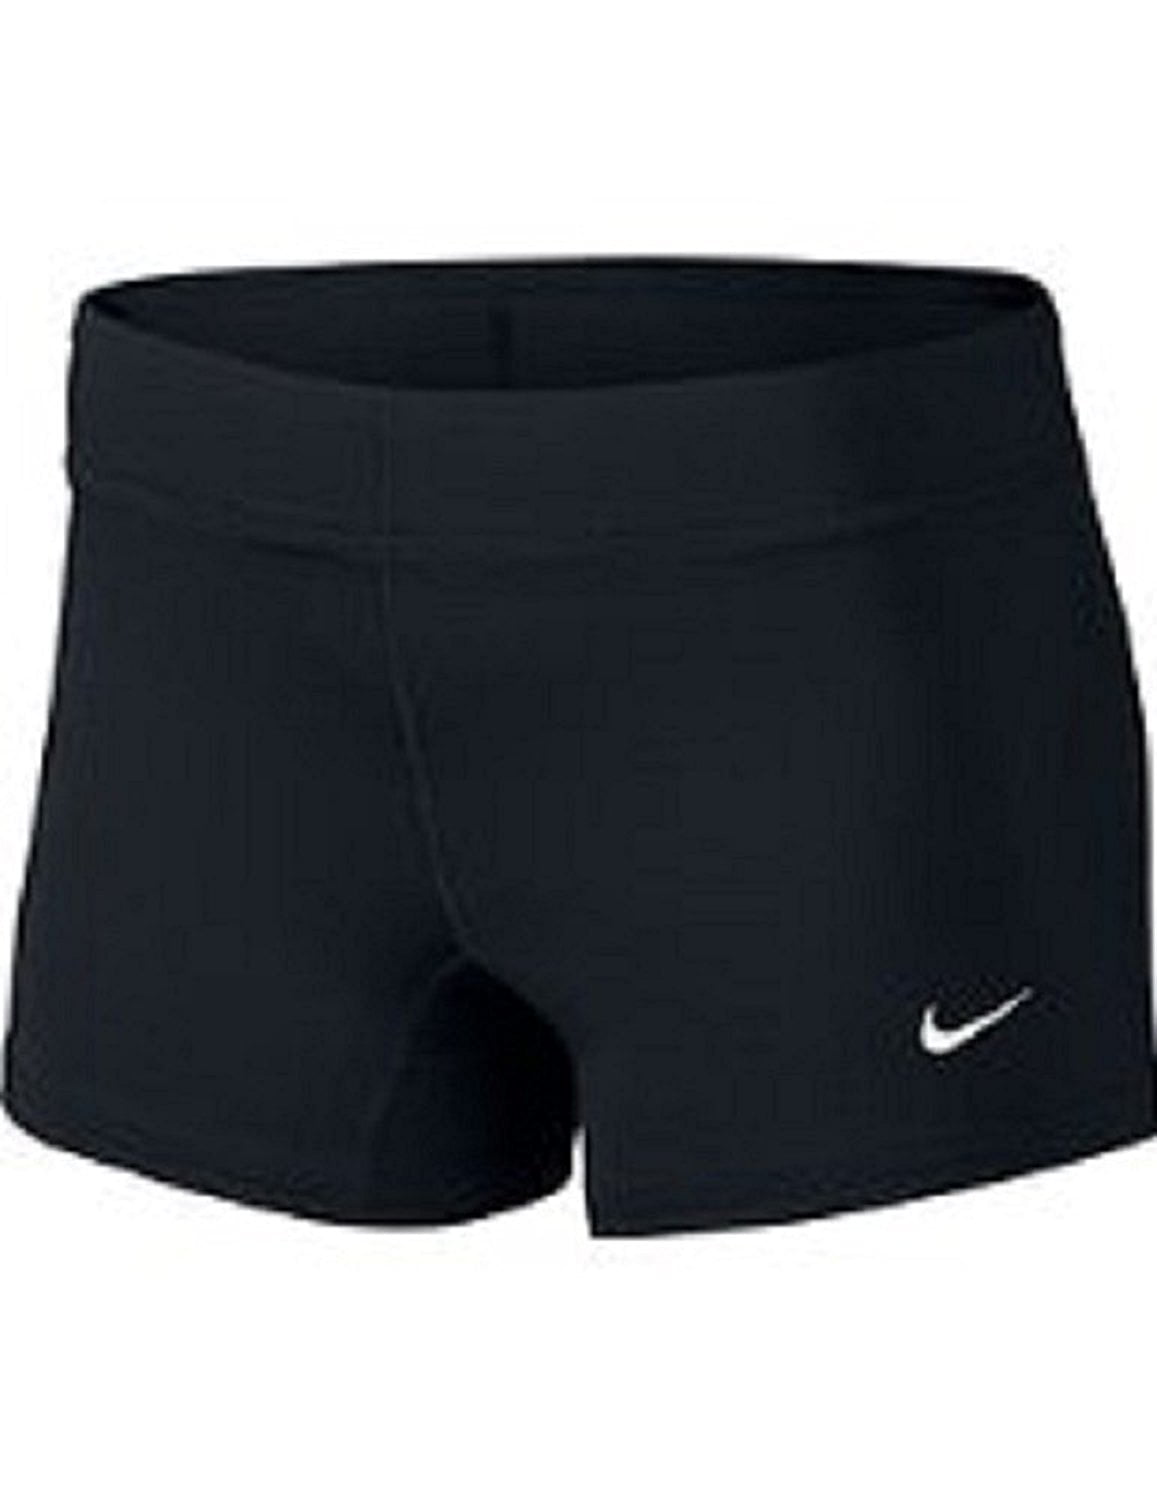 Nike Performance Women's Volleyball Game Shorts (X-Large, Black ...